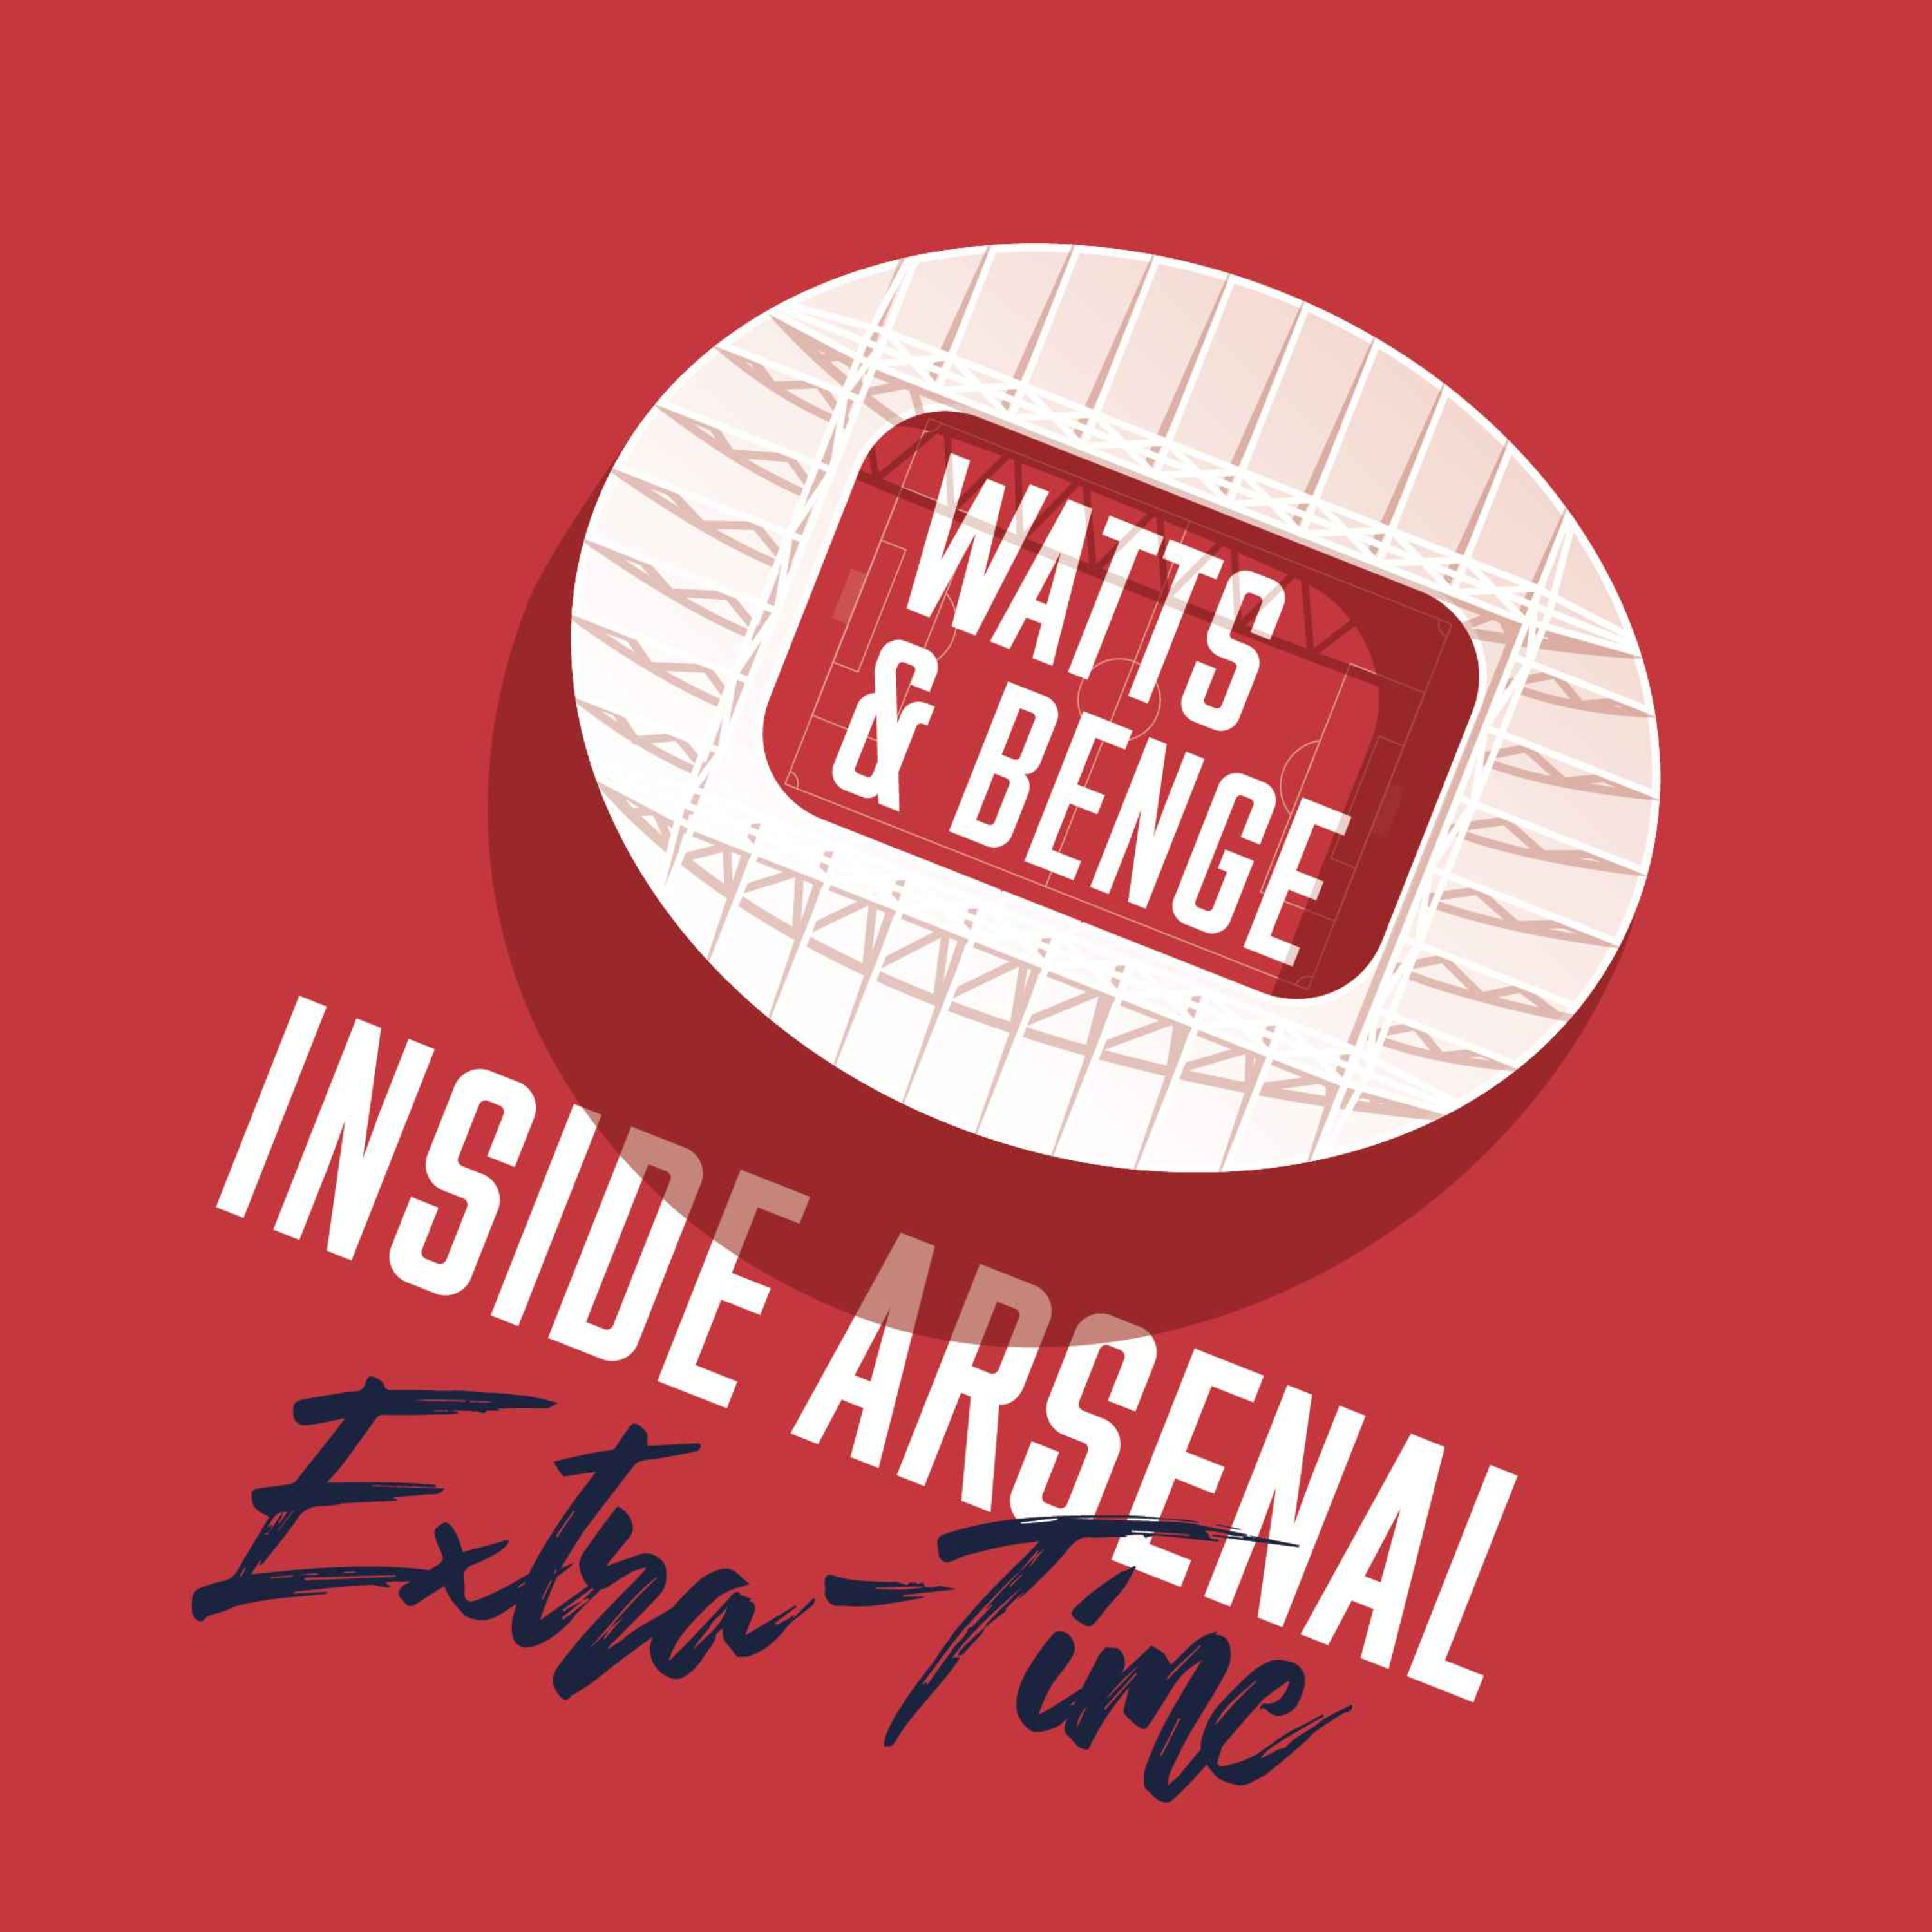 Extra-time with James Benge - Transfer round-up + Liverpool preview & Arteta's midfield decision